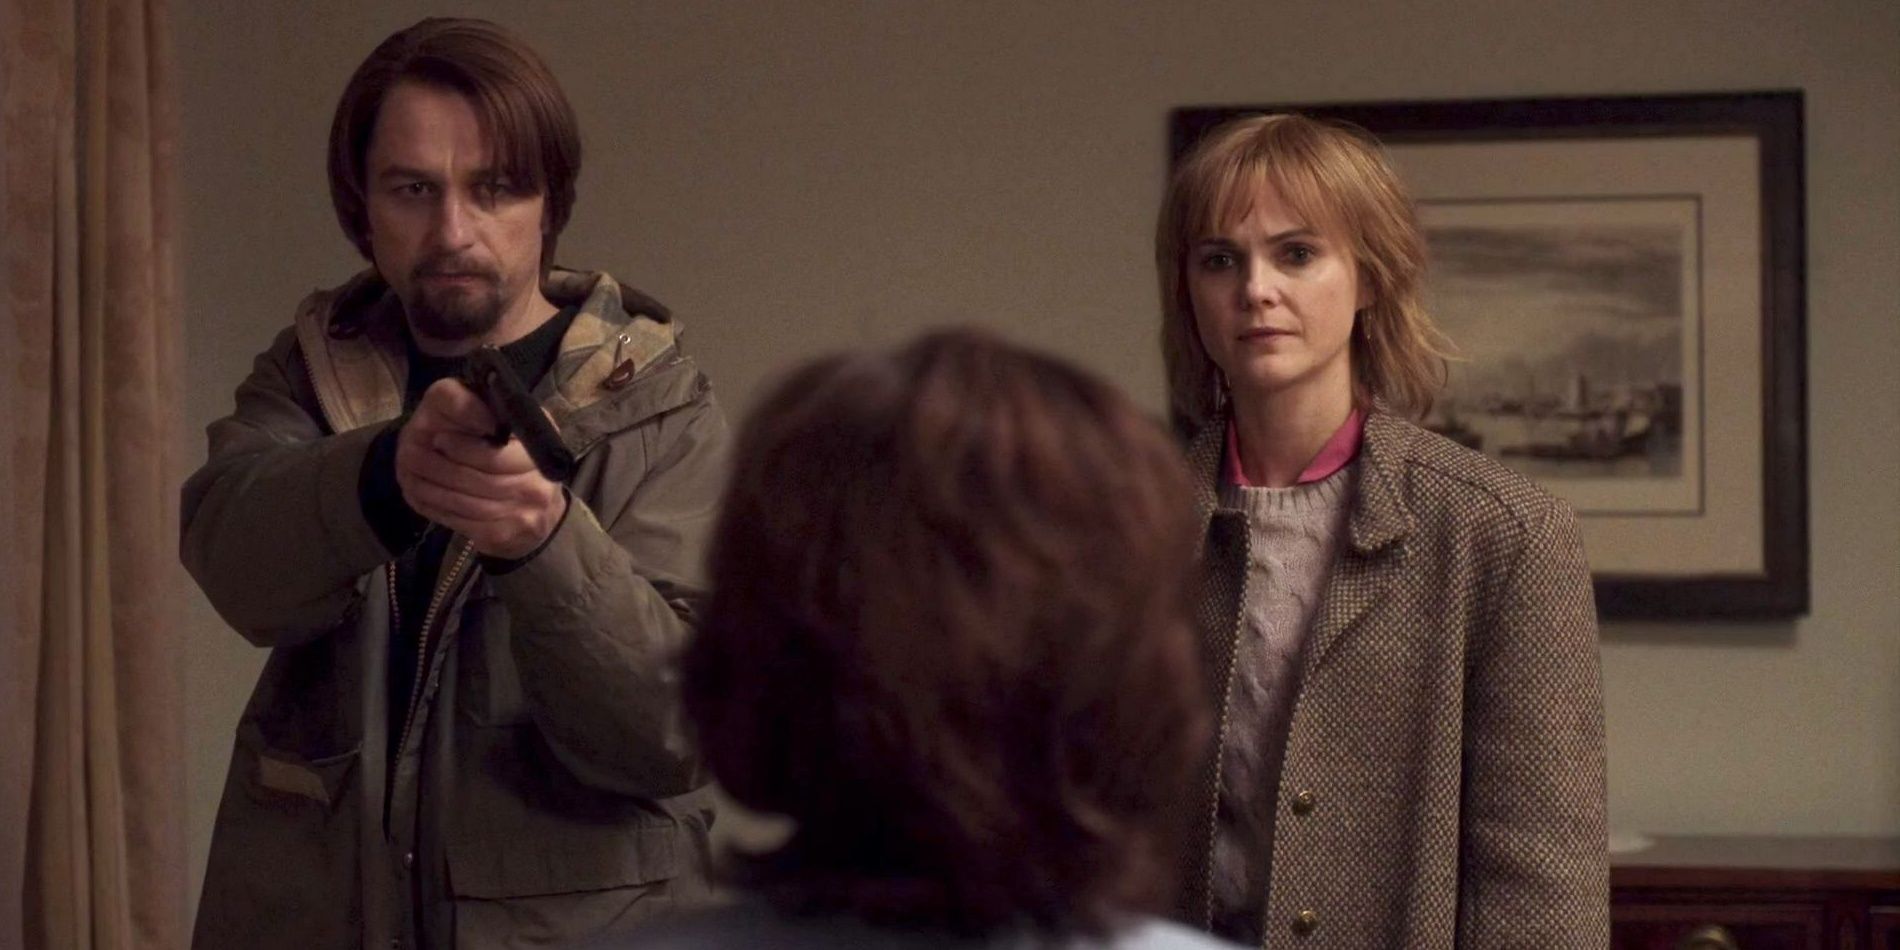 Philip points a gun while Elizabeth stares at the target in The Americans